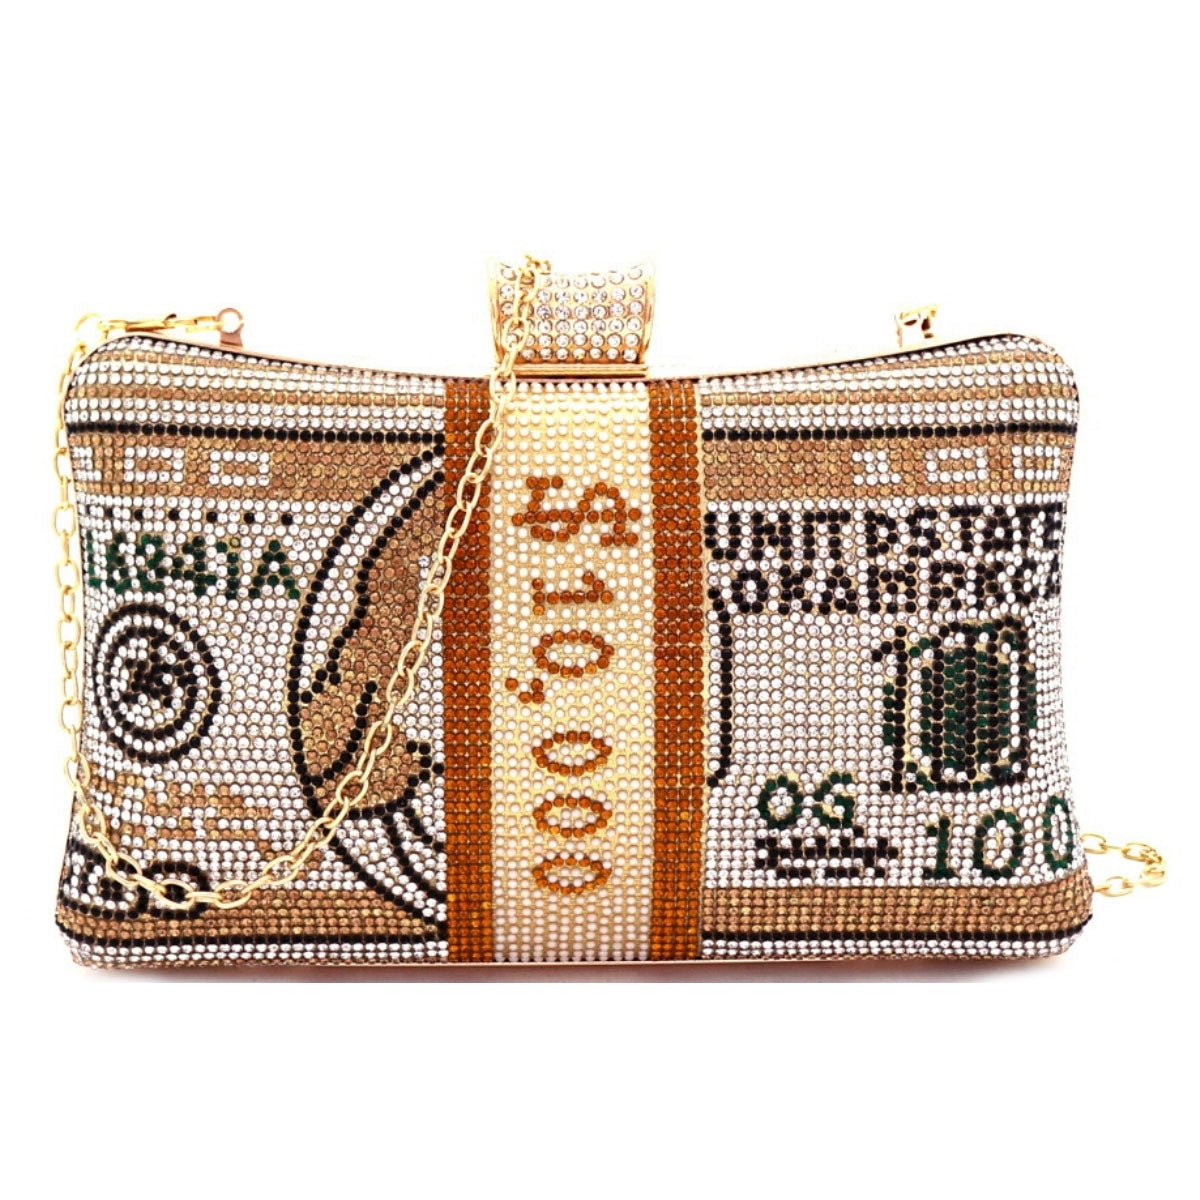 Gold Bling Banded Cash Luxury Clutch